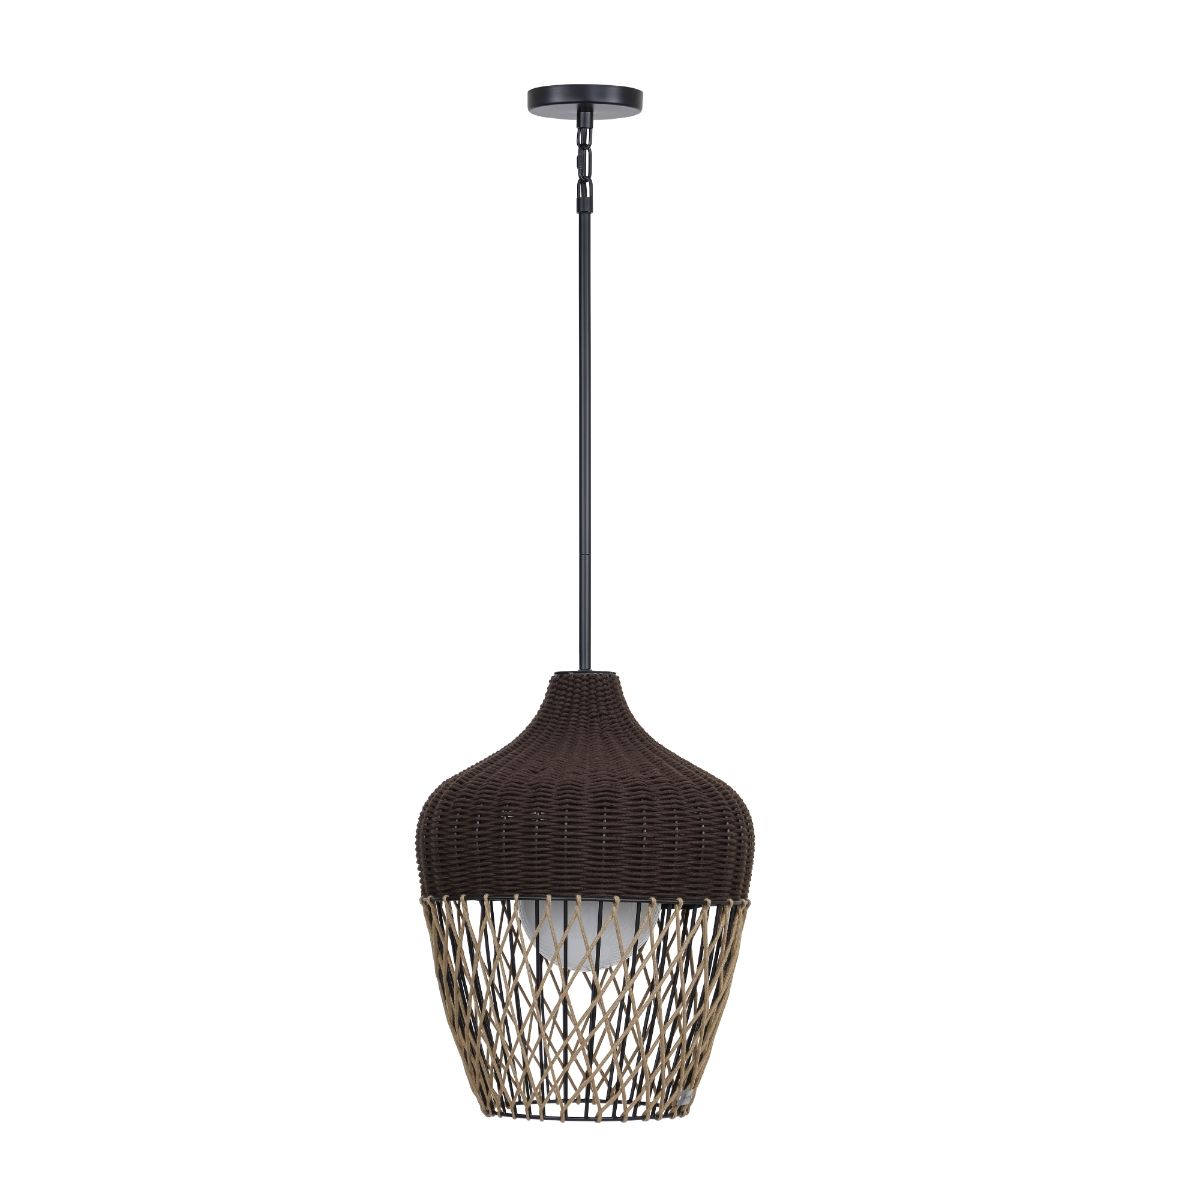 Hannha 22 in. Outdoor Pendant Light khaki and brown Finish